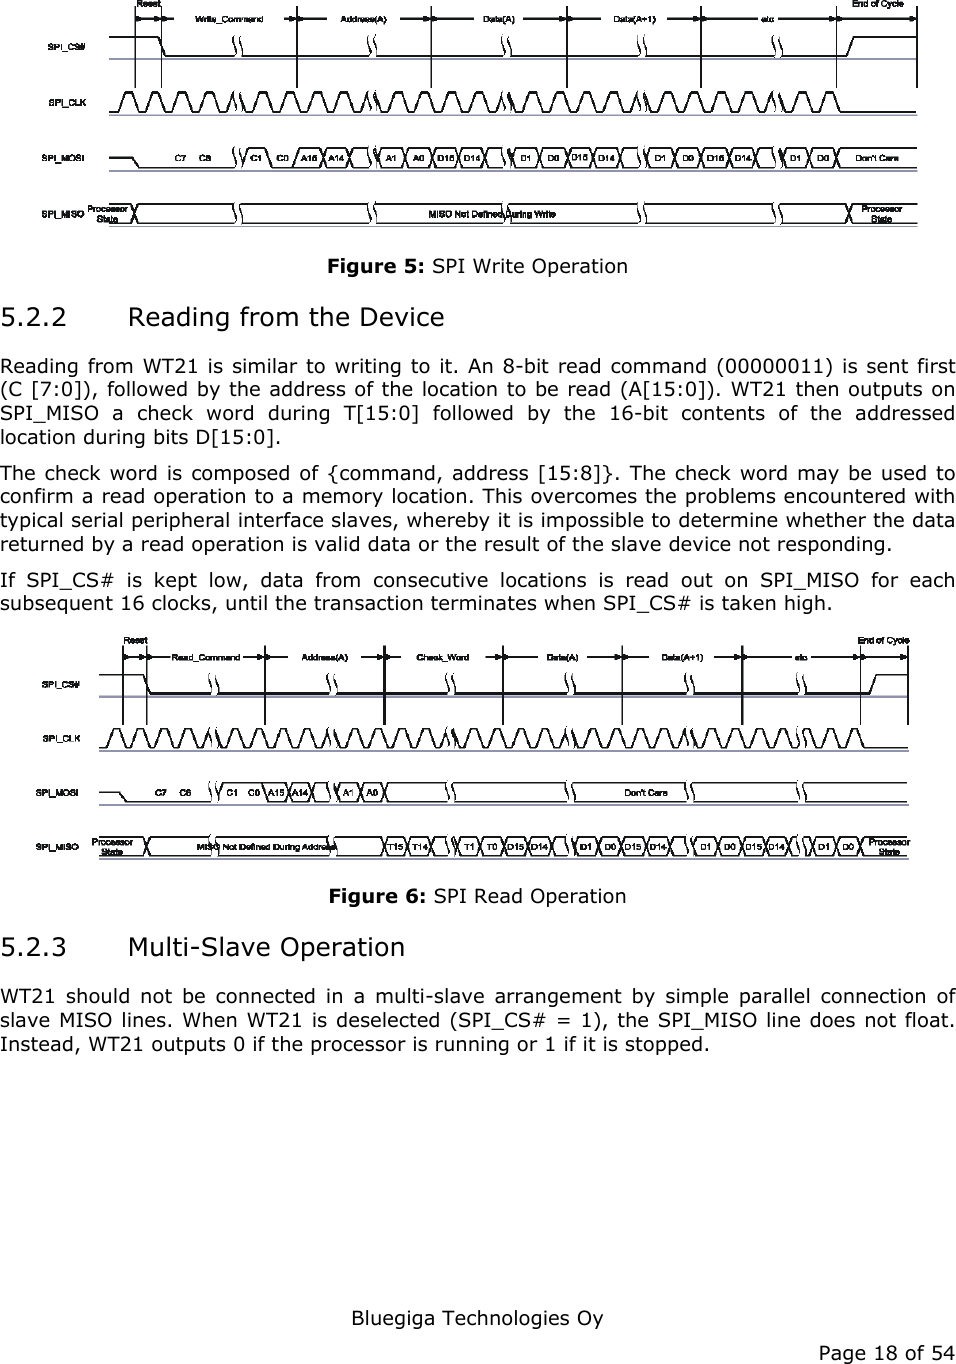   Bluegiga Technologies Oy Page 18 of 54  Figure 5: SPI Write Operation 5.2.2 Reading from the Device Reading from WT21 is similar to writing to it. An 8-bit read command (00000011) is sent first (C [7:0]), followed by the address of the location to be read (A[15:0]). WT21 then outputs on SPI_MISO a check word during T[15:0] followed by the 16-bit contents of the addressed location during bits D[15:0]. The check word is composed of {command, address [15:8]}. The check word may be used to confirm a read operation to a memory location. This overcomes the problems encountered with typical serial peripheral interface slaves, whereby it is impossible to determine whether the data returned by a read operation is valid data or the result of the slave device not responding. If SPI_CS# is kept low, data from consecutive locations is read out on SPI_MISO for each subsequent 16 clocks, until the transaction terminates when SPI_CS# is taken high.  Figure 6: SPI Read Operation 5.2.3 Multi-Slave Operation WT21 should not be connected in a multi-slave arrangement by simple parallel connection of slave MISO lines. When WT21 is deselected (SPI_CS# = 1), the SPI_MISO line does not float. Instead, WT21 outputs 0 if the processor is running or 1 if it is stopped. 